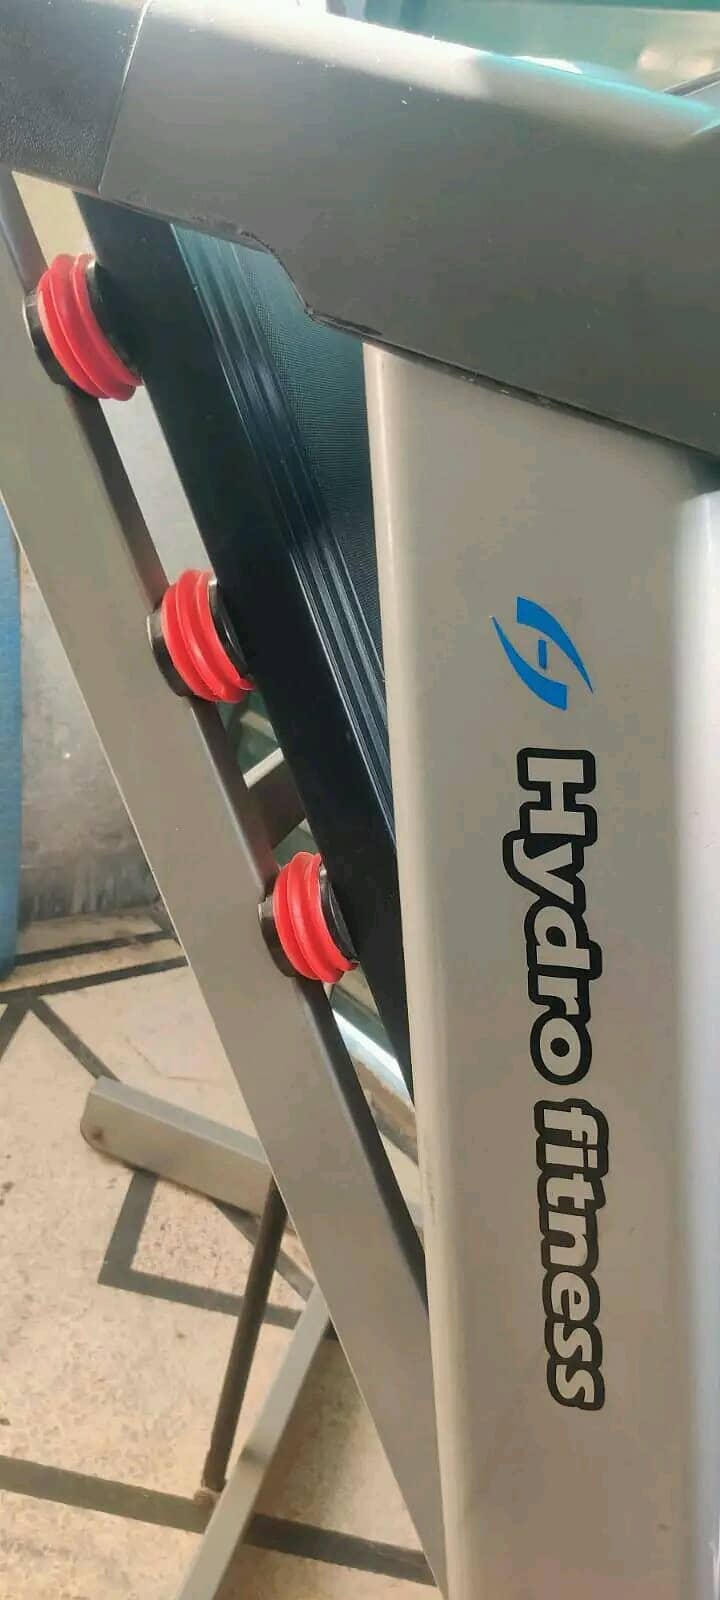 Hydro fitness electrical treadmill 0316/1736/128 whasapp 2